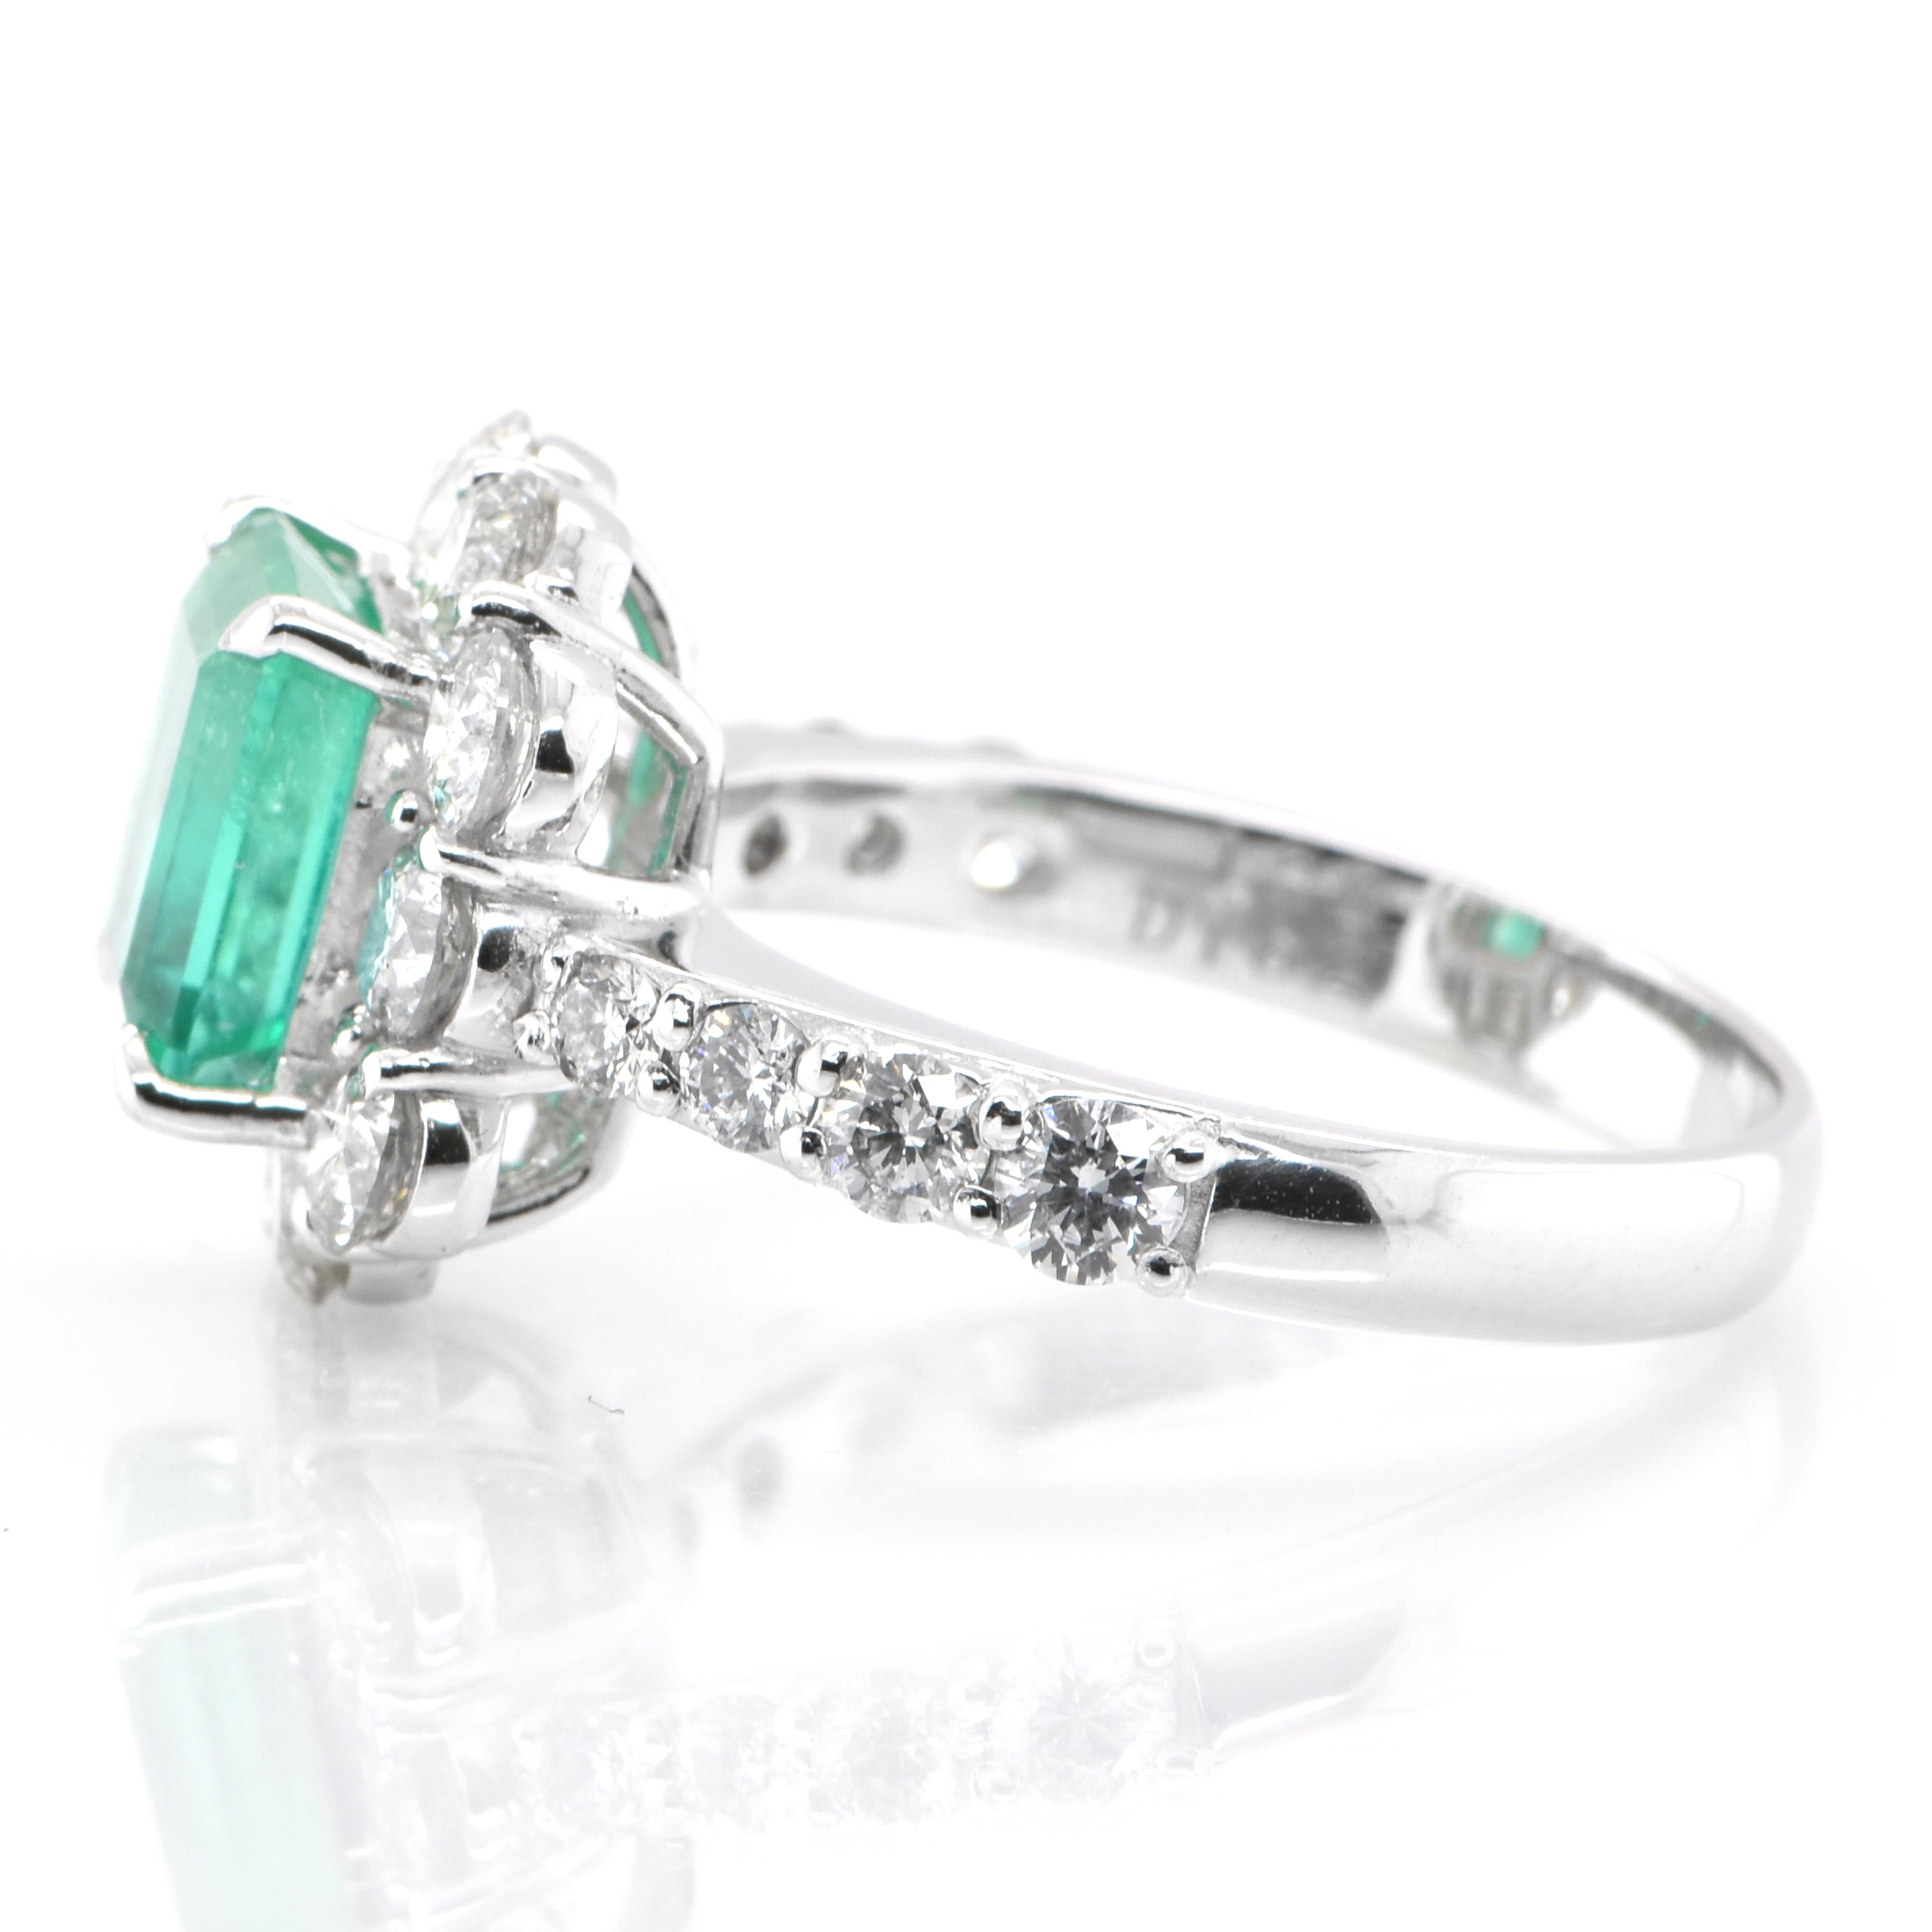 Modern 1.86 Carat Natural Colombian Emerald and Diamond Ring Set in Platinum For Sale